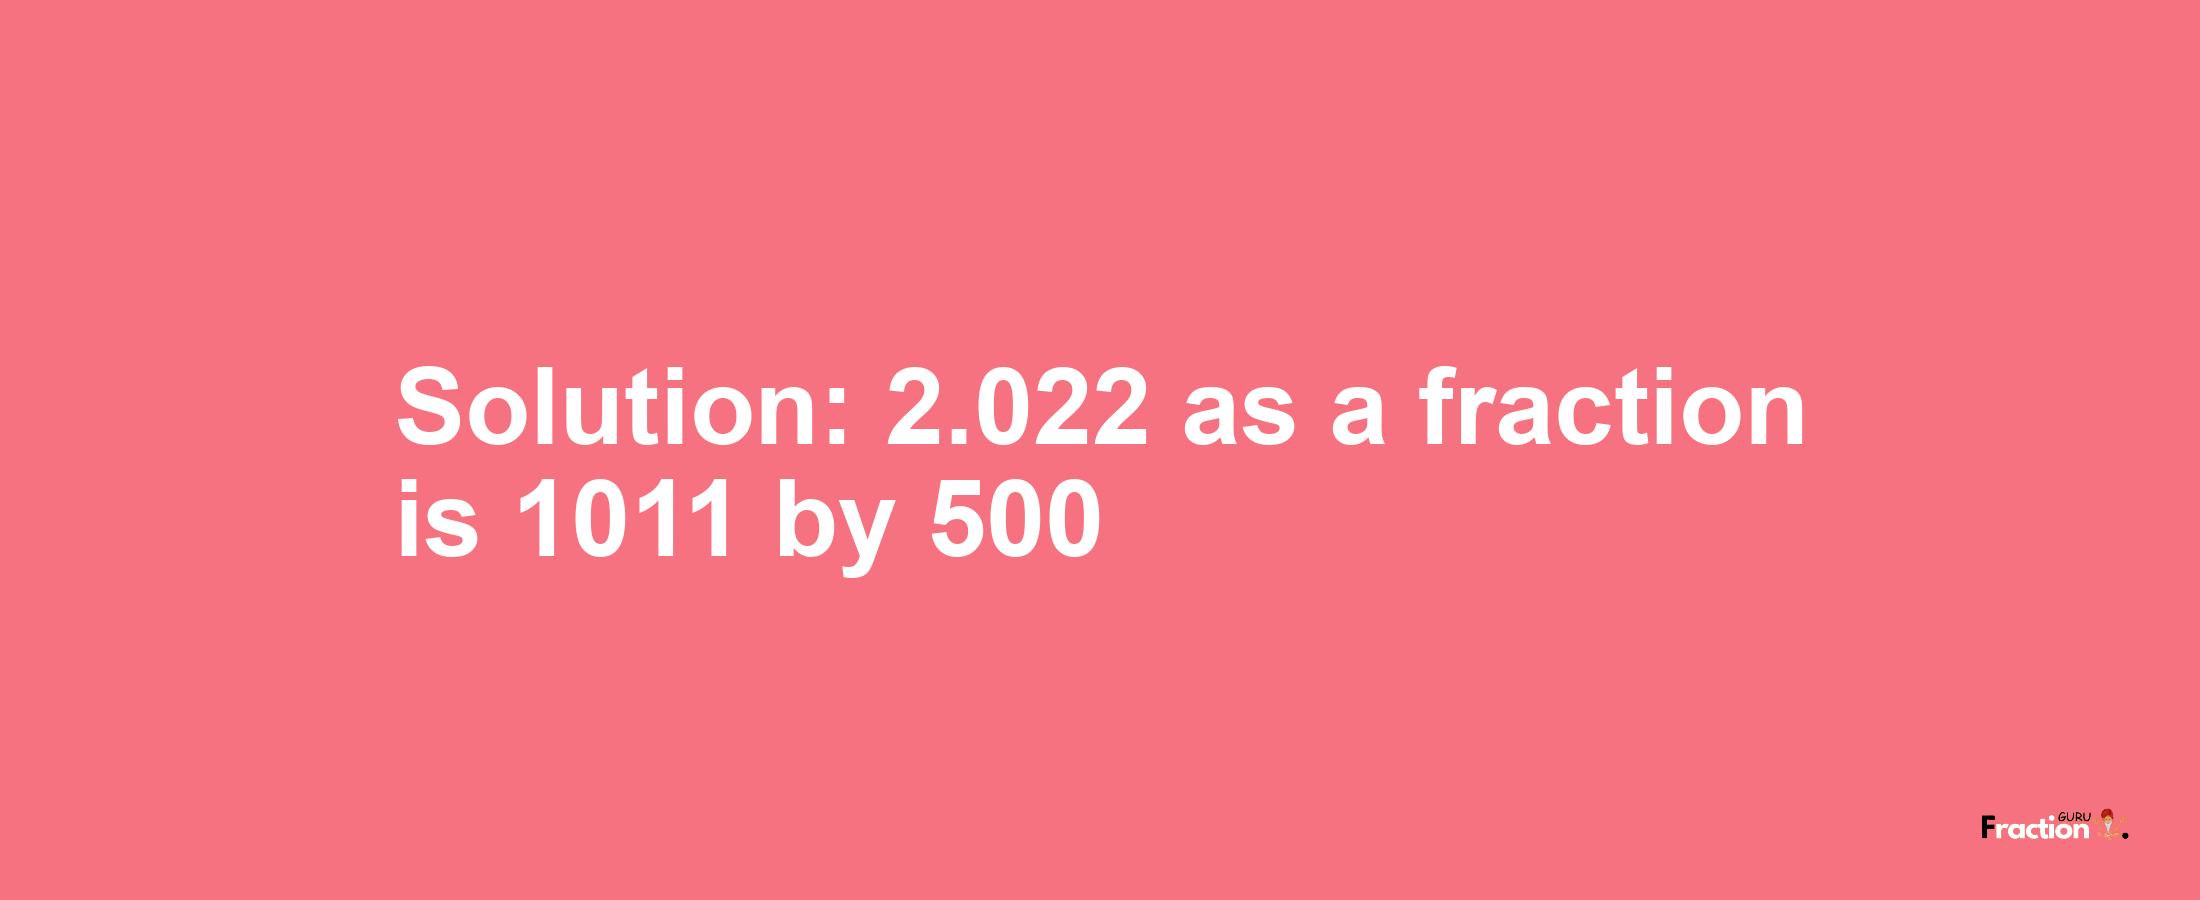 Solution:2.022 as a fraction is 1011/500